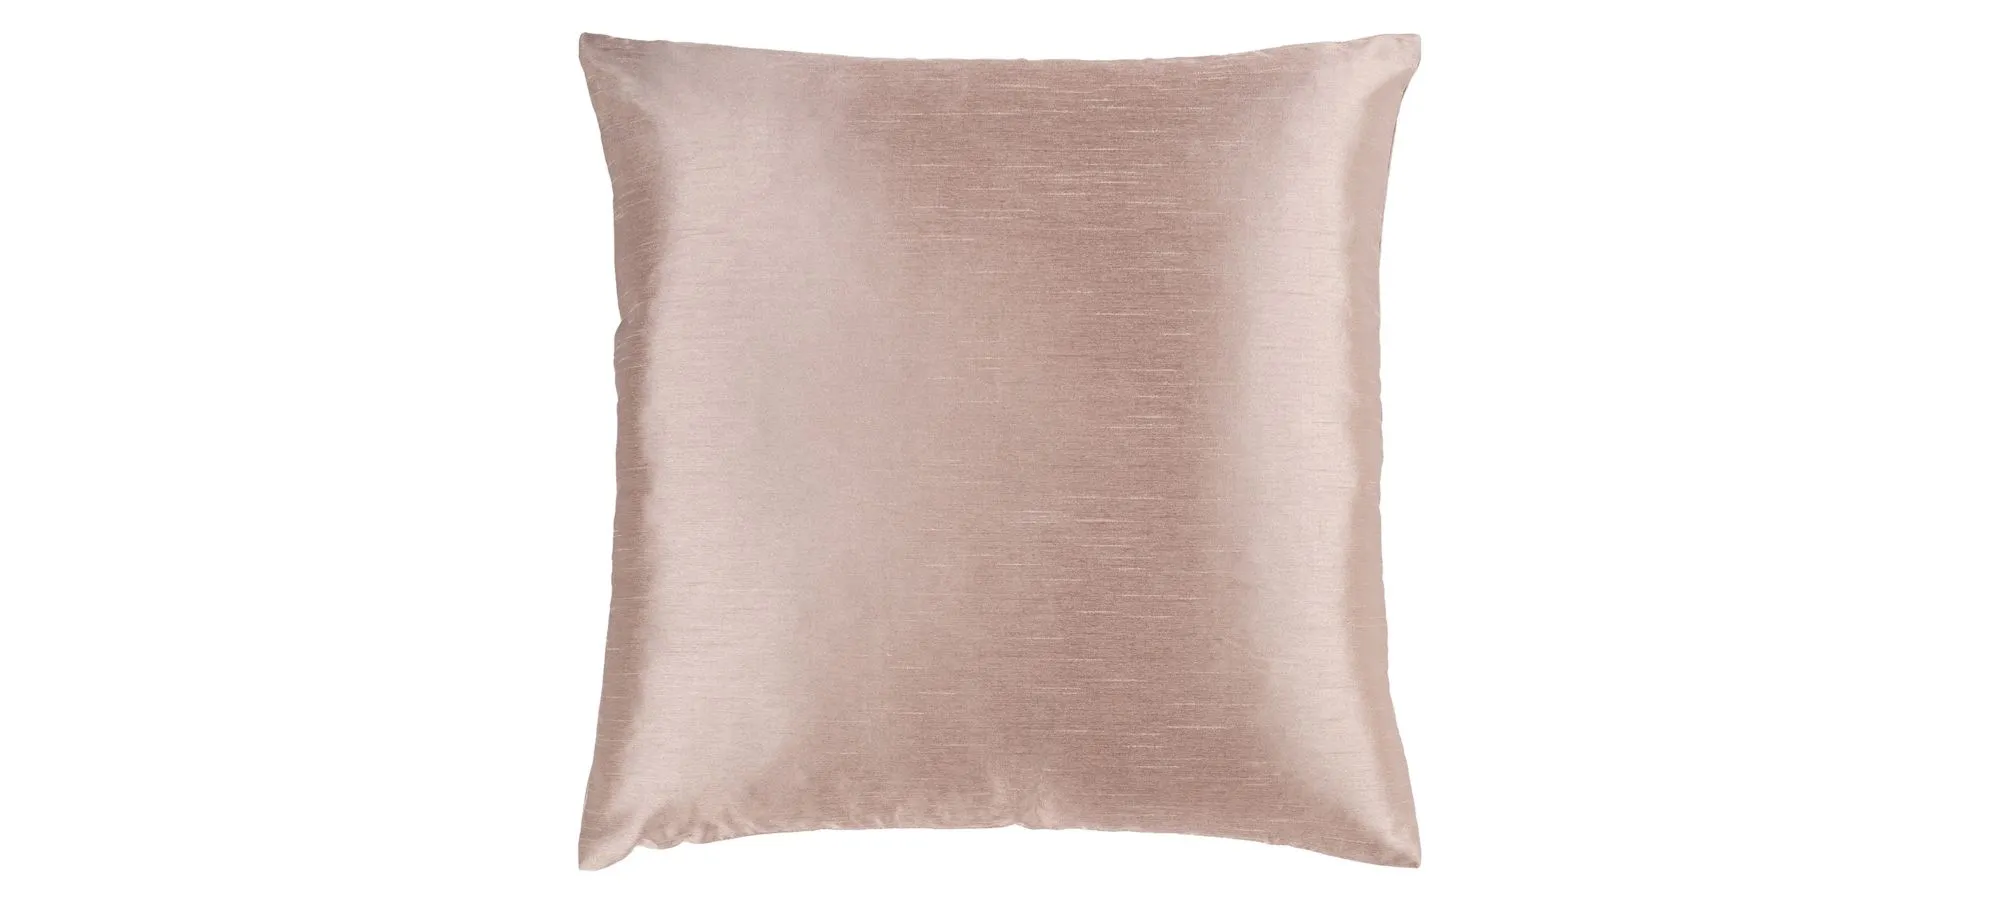 Solid Luxe 18" Down Throw Pillow in Blush by Surya